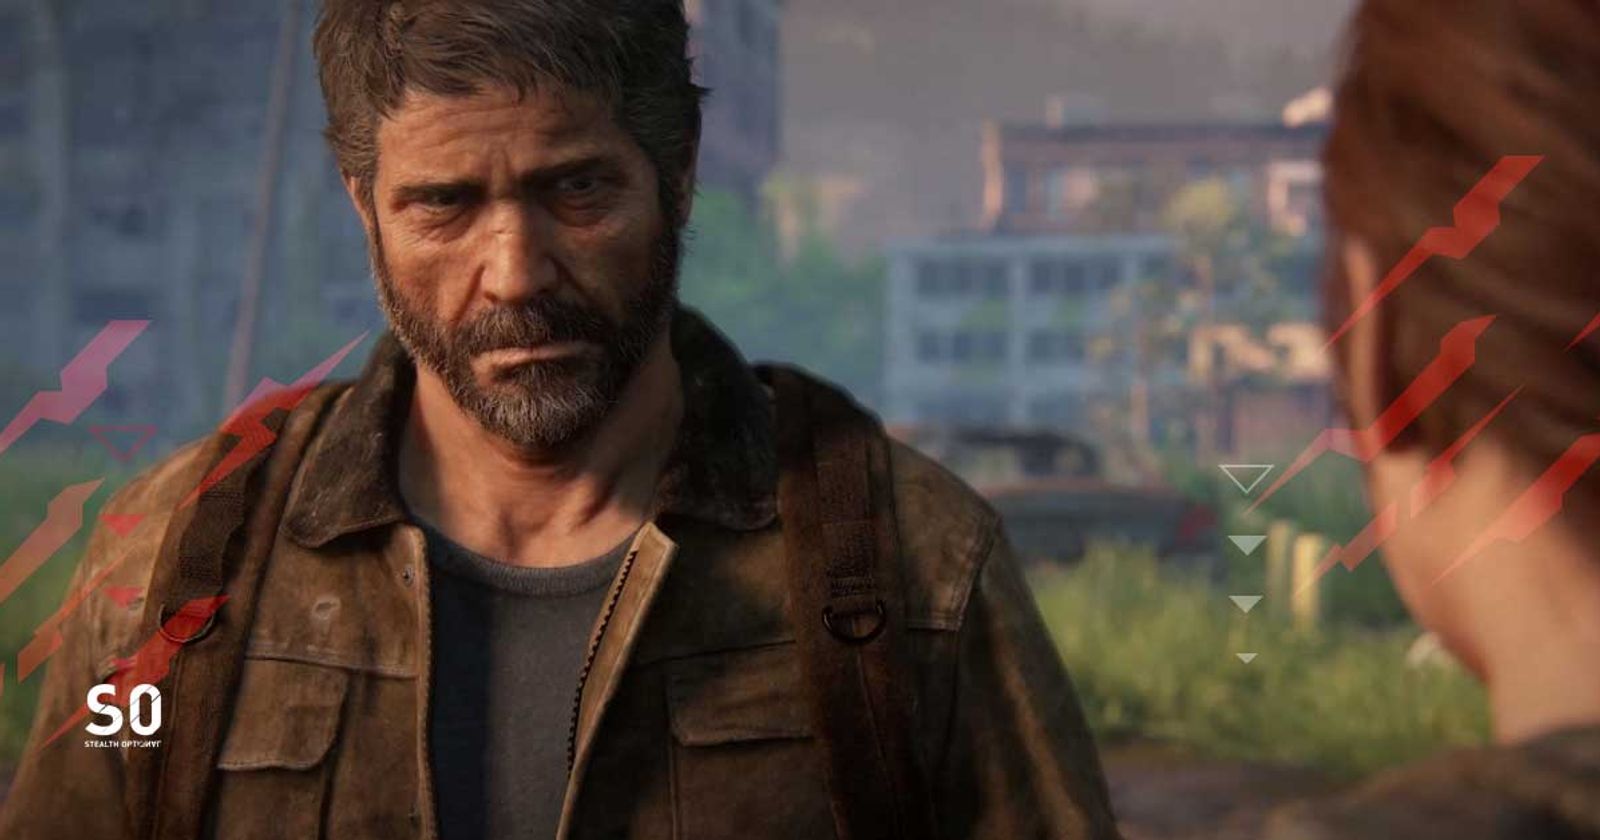 Troy Baker, who played Joel in The Last of Us, said that his vision for the  ending of the first part of the game was changed by the birth of his son